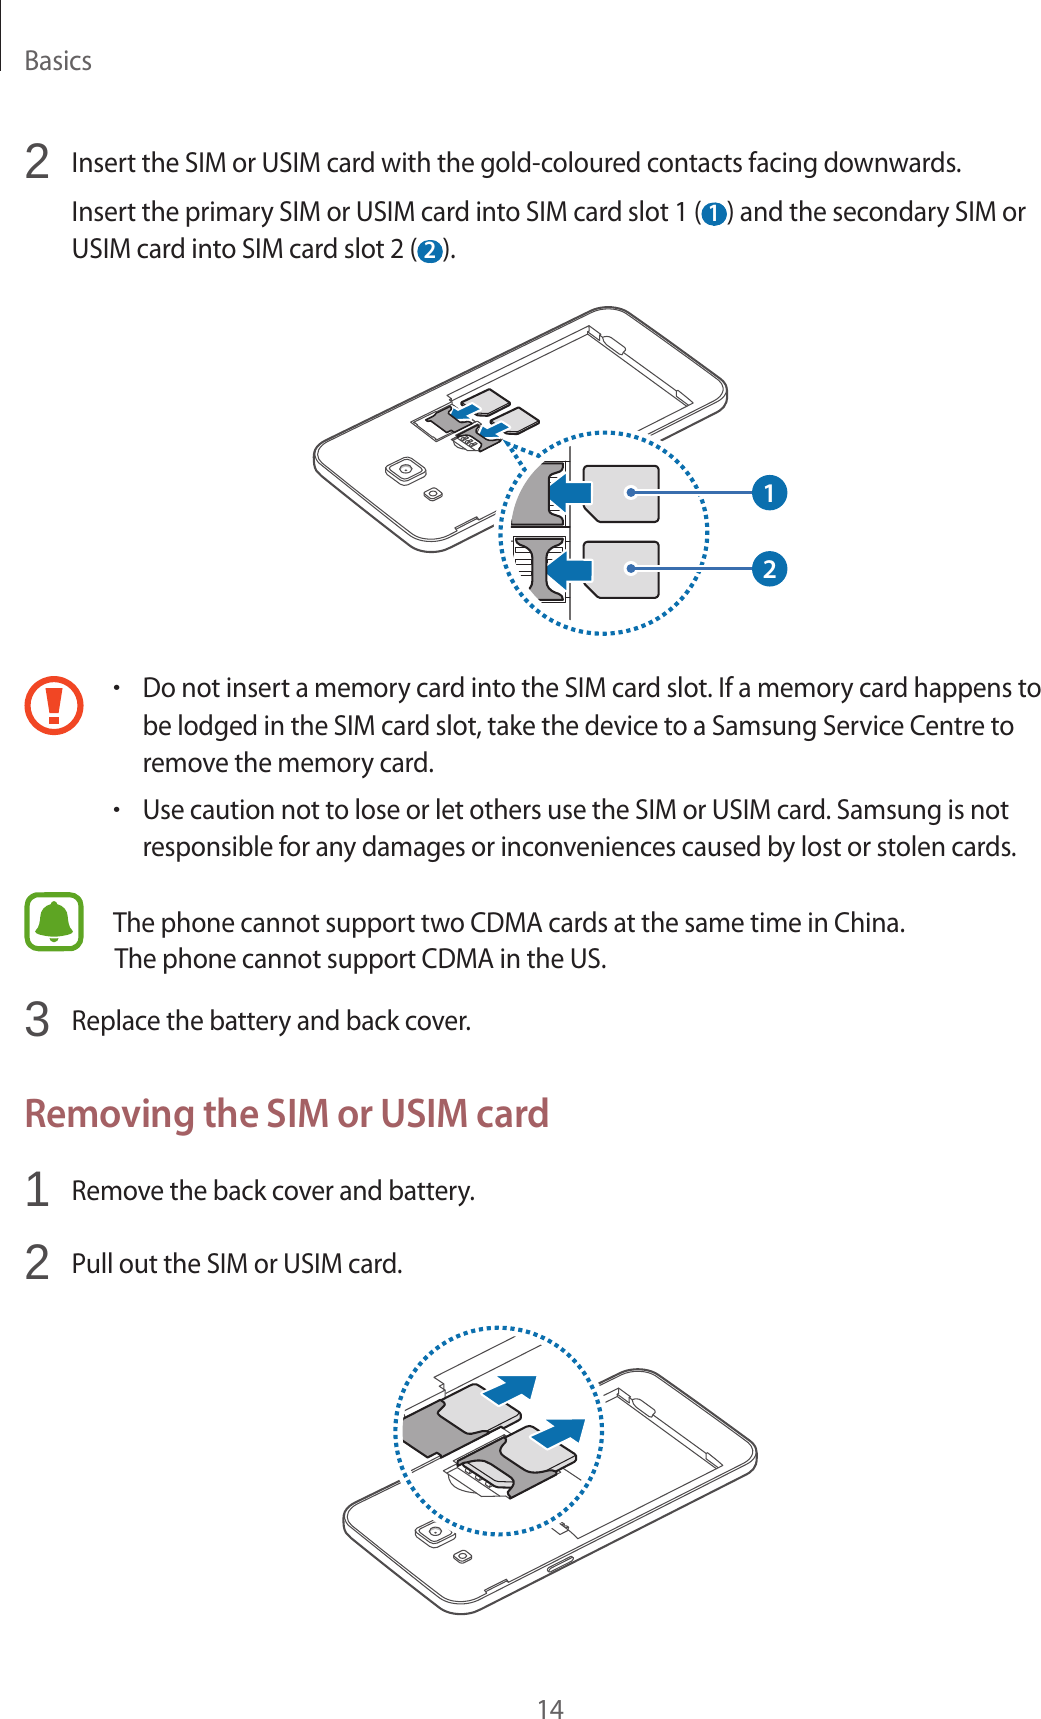 Basics142  Insert the SIM or USIM card with the gold-coloured contacts facing downwards.Insert the primary SIM or USIM card into SIM card slot 1 ( 1 ) and the secondary SIM or USIM card into SIM card slot 2 ( 2 ).12•Do not insert a memory card into the SIM card slot. If a memory card happens to be lodged in the SIM card slot, take the device to a Samsung Service Centre to remove the memory card.•Use caution not to lose or let others use the SIM or USIM card. Samsung is not responsible for any damages or inconveniences caused by lost or stolen cards.The phone cannot support two CDMA cards at the same time in China.3  Replace the battery and back cover.Removing the SIM or USIM card1  Remove the back cover and battery.2  Pull out the SIM or USIM card.The phone cannot support CDMA in the US.